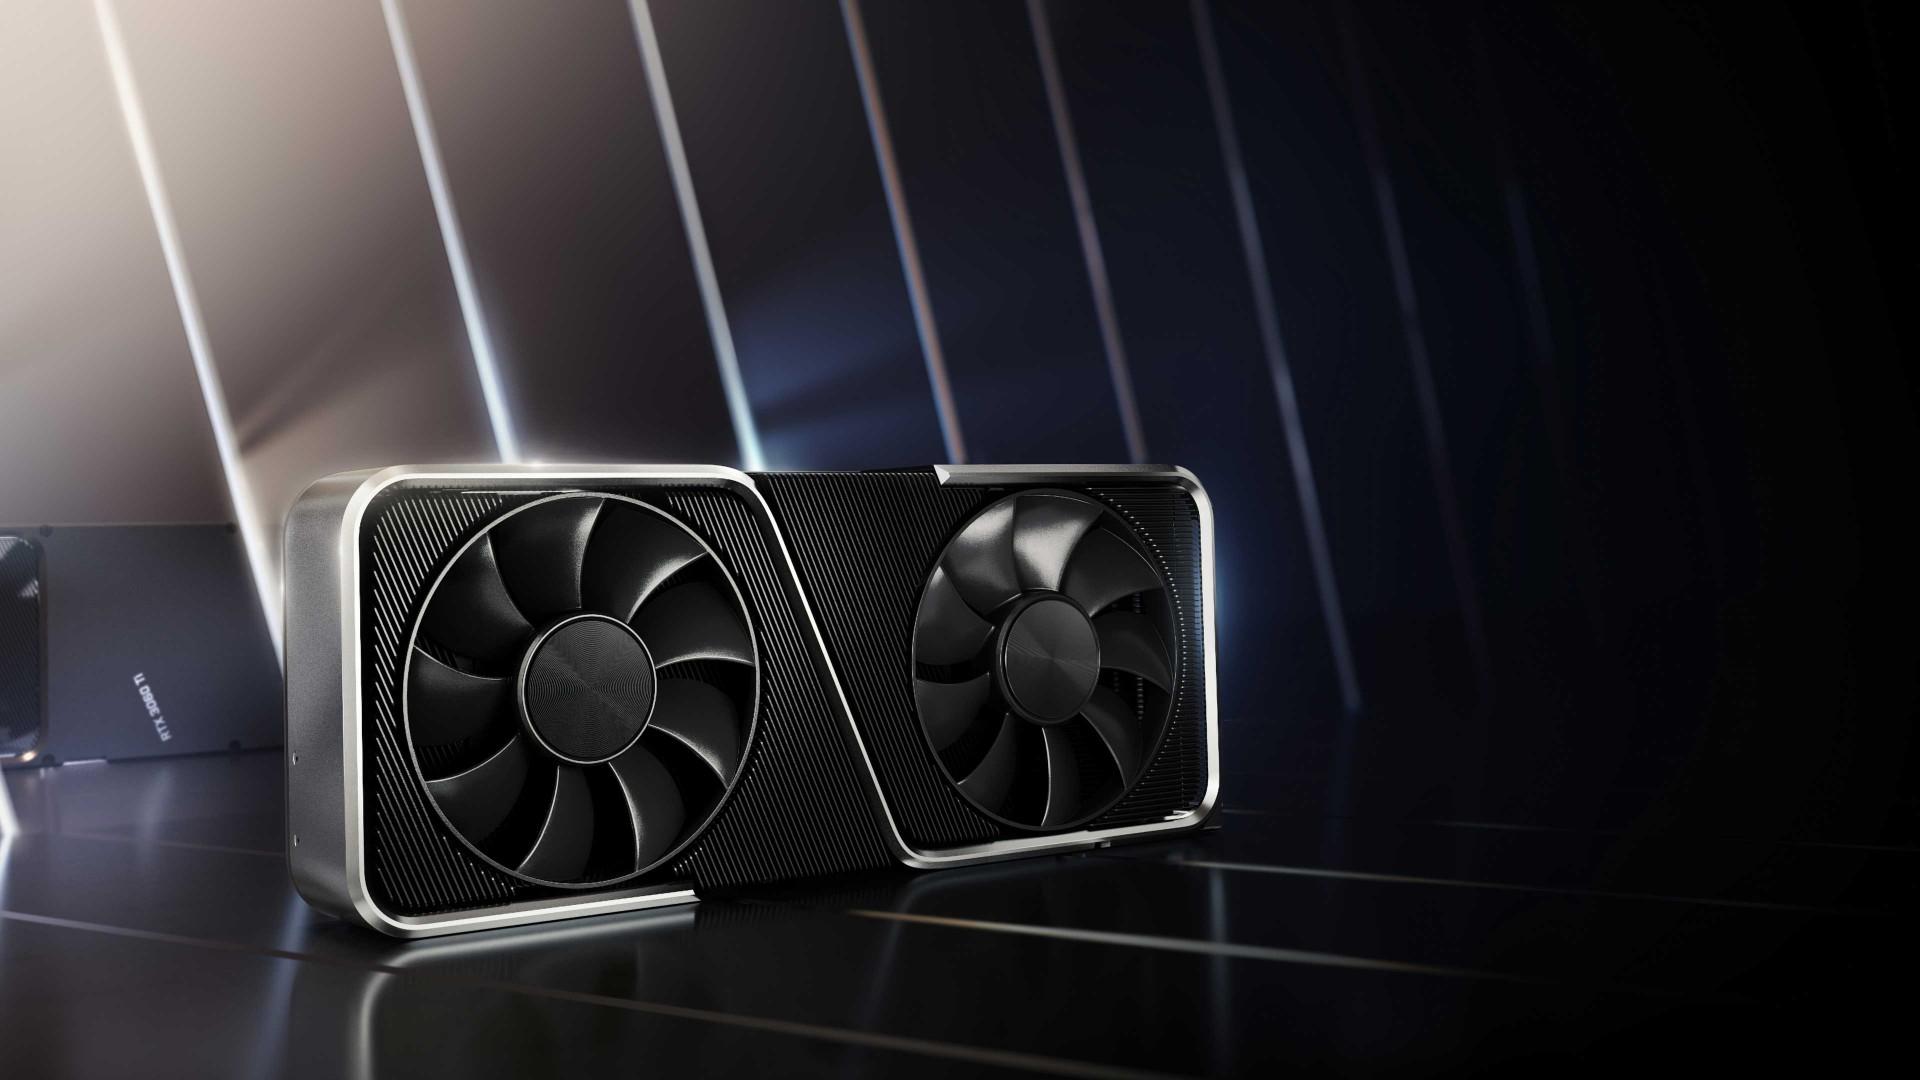 Nvidias RTX 3050 could release in 8 and 4GB variants with RTX 3060 chip News 24